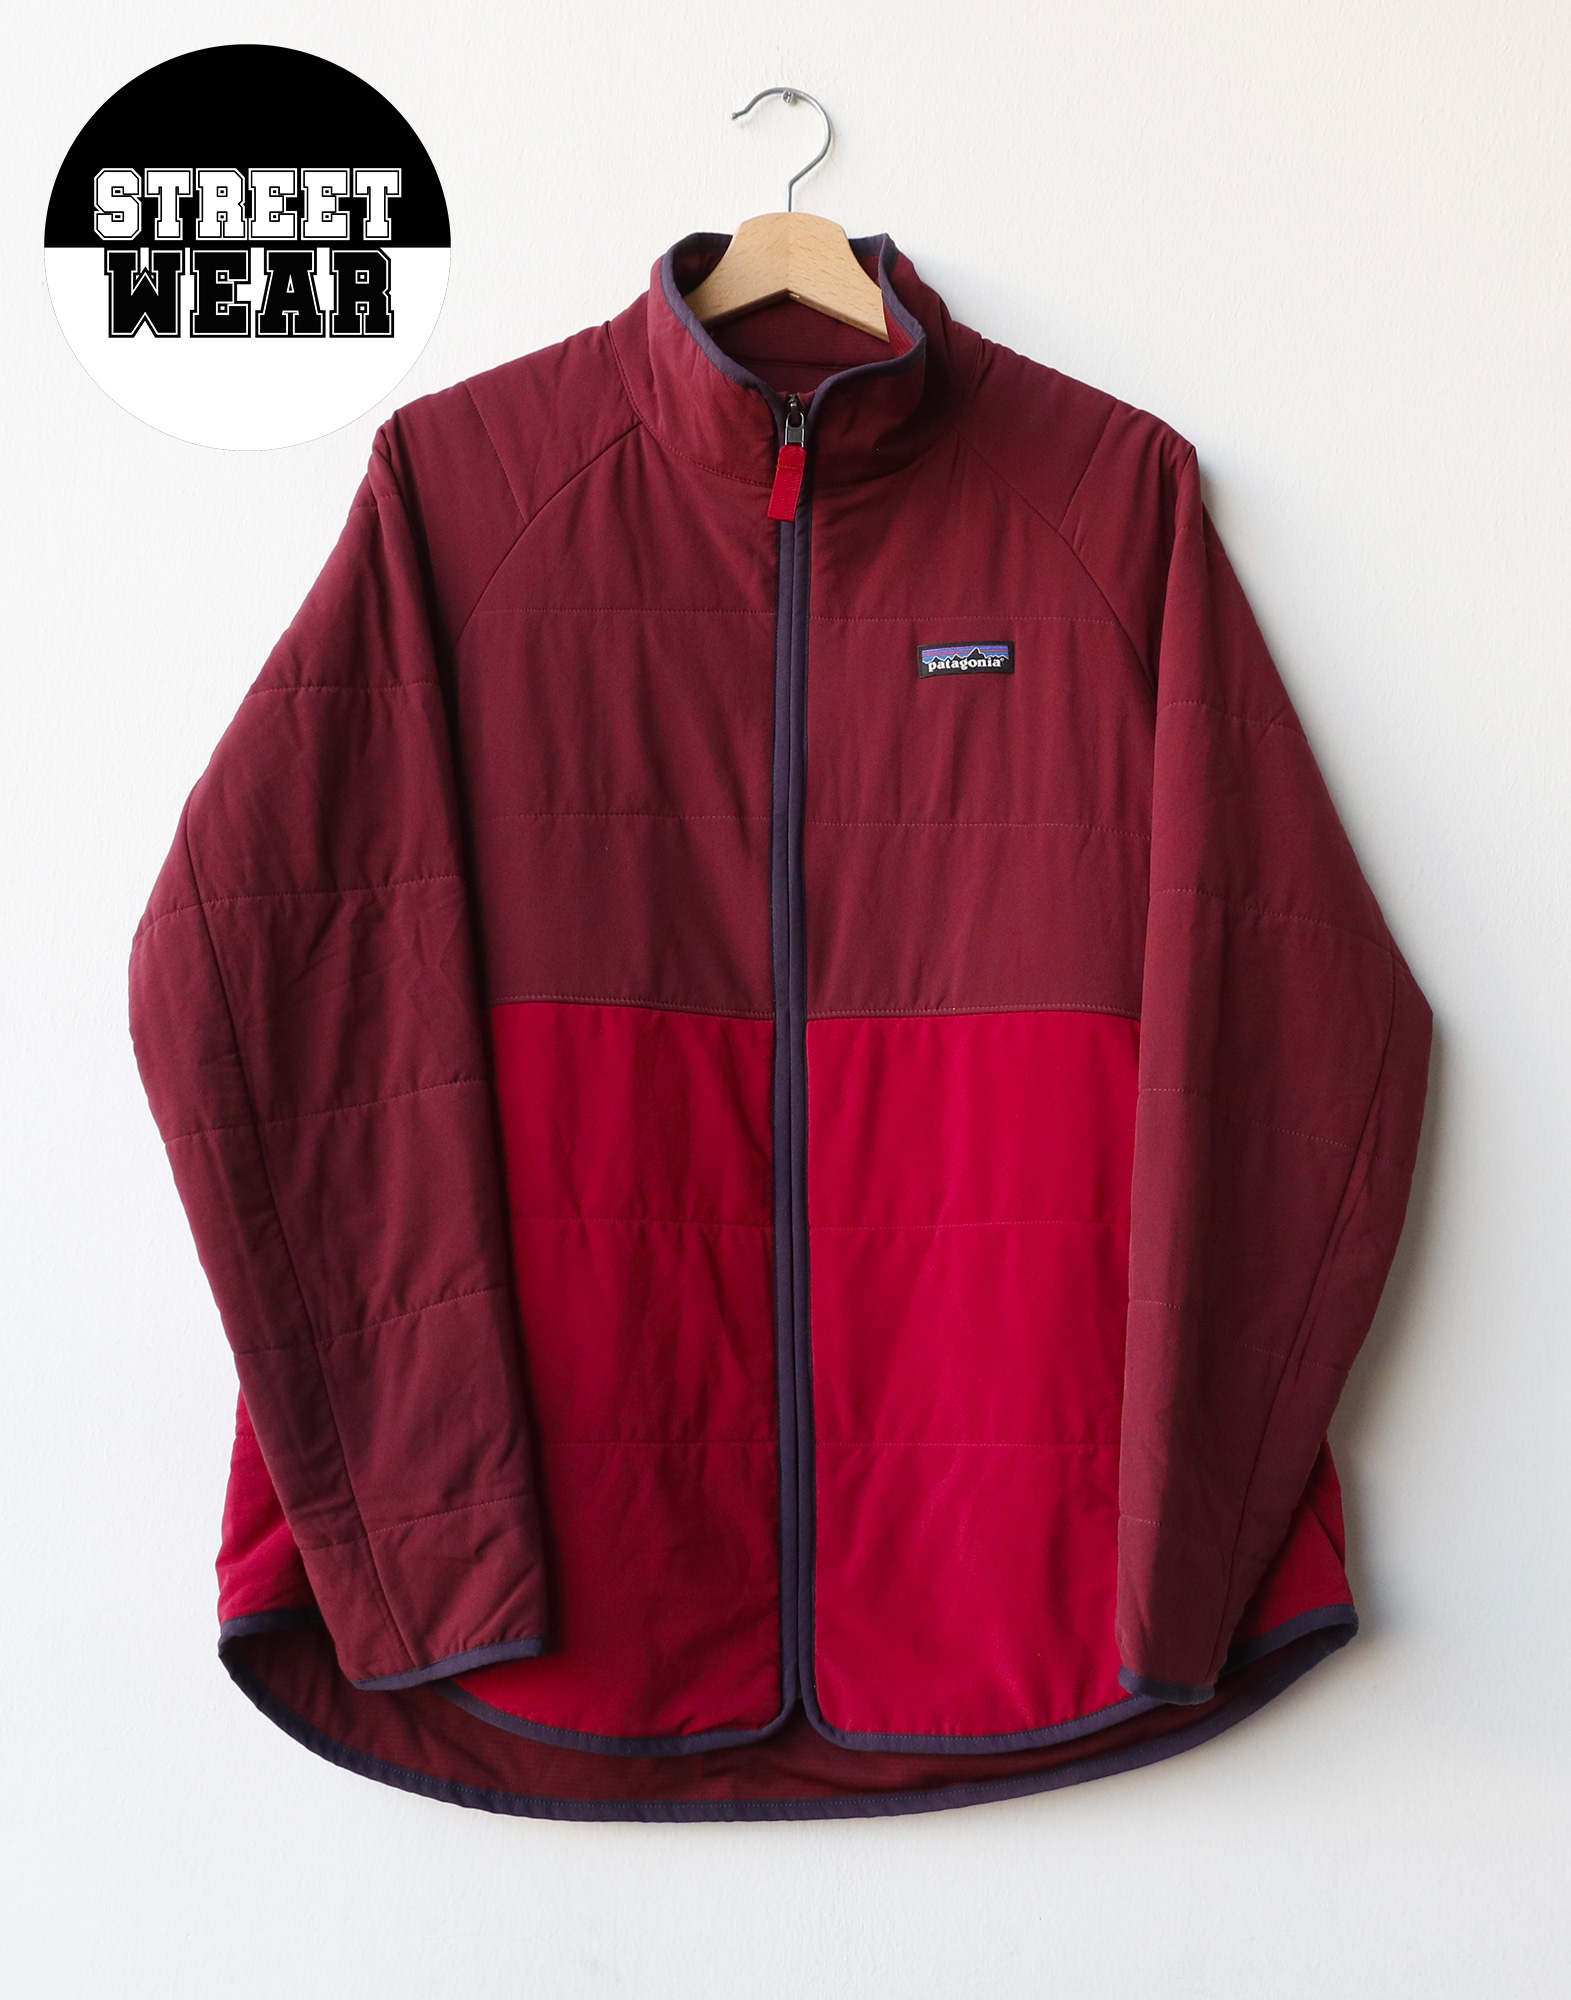 Patagonia - Recycled polyester jacket